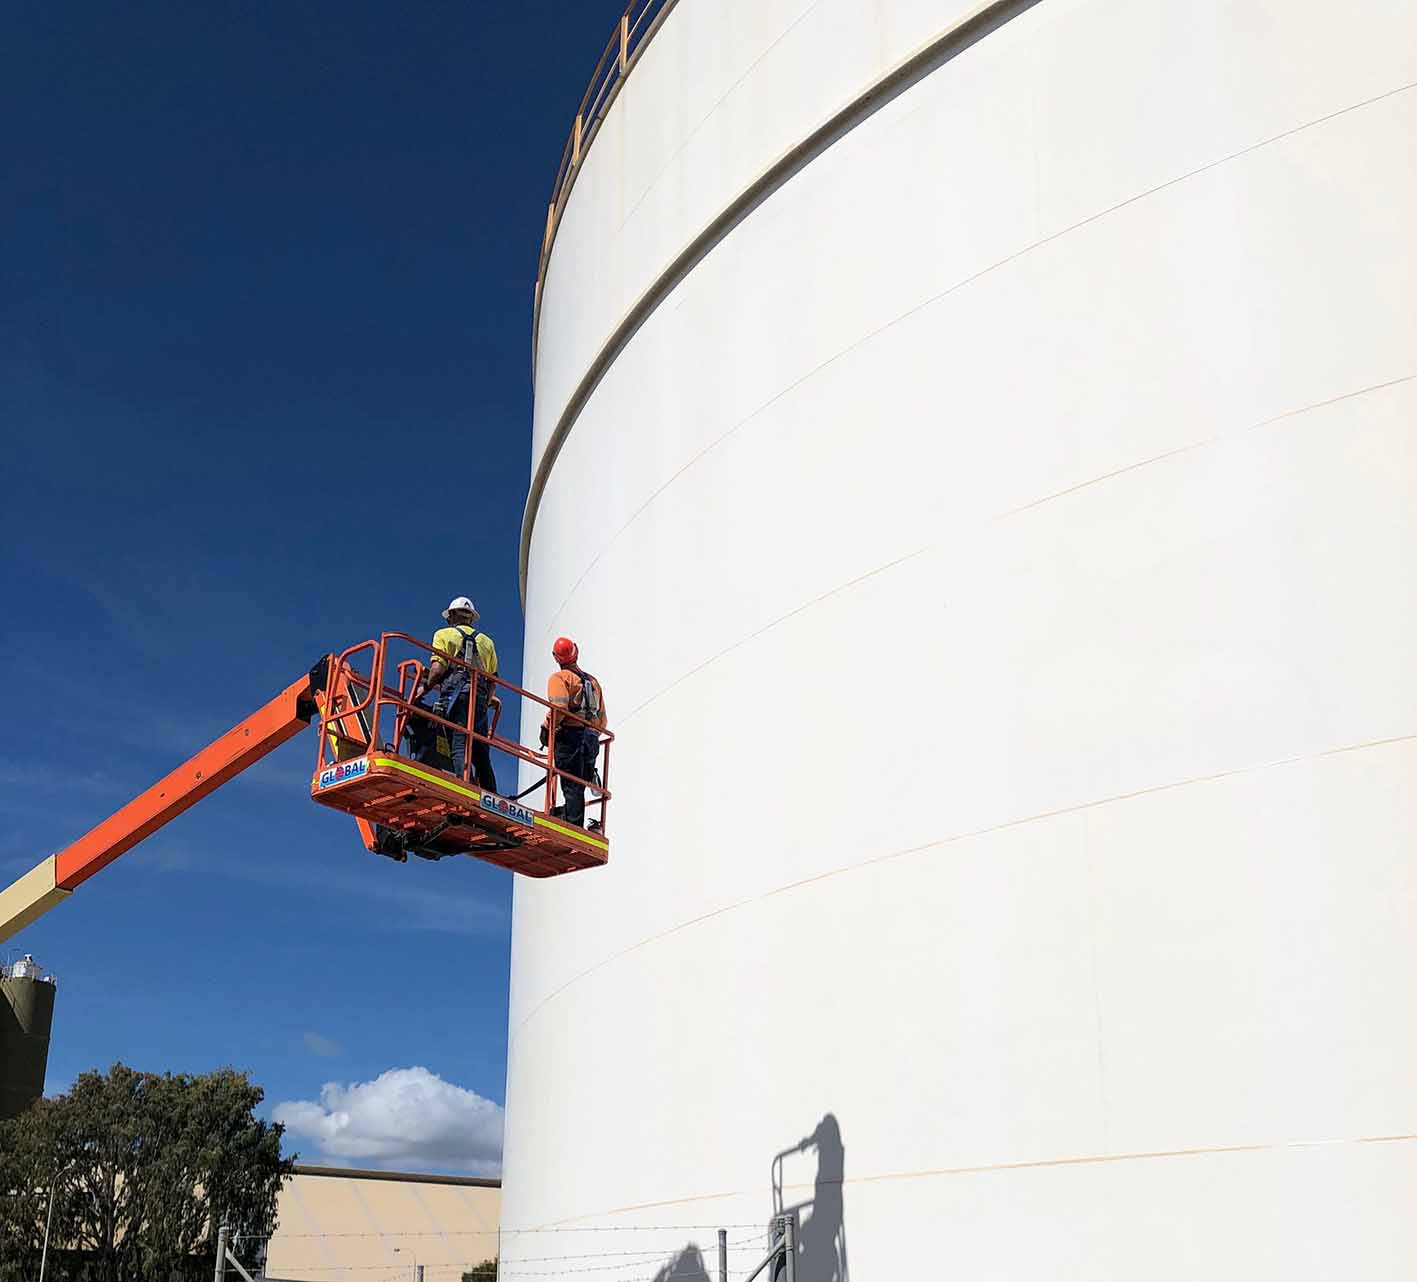 ADM inspecting a molasses tank at the Townsville Port